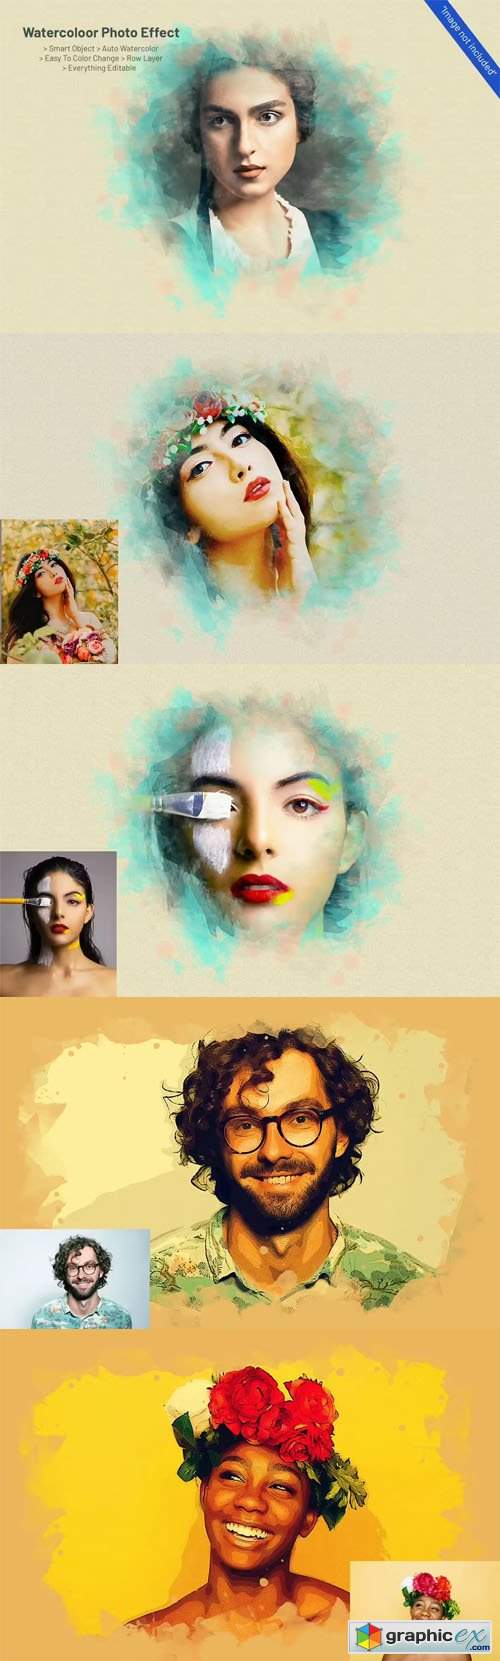  Watercolor Photo Effects for Photoshop 